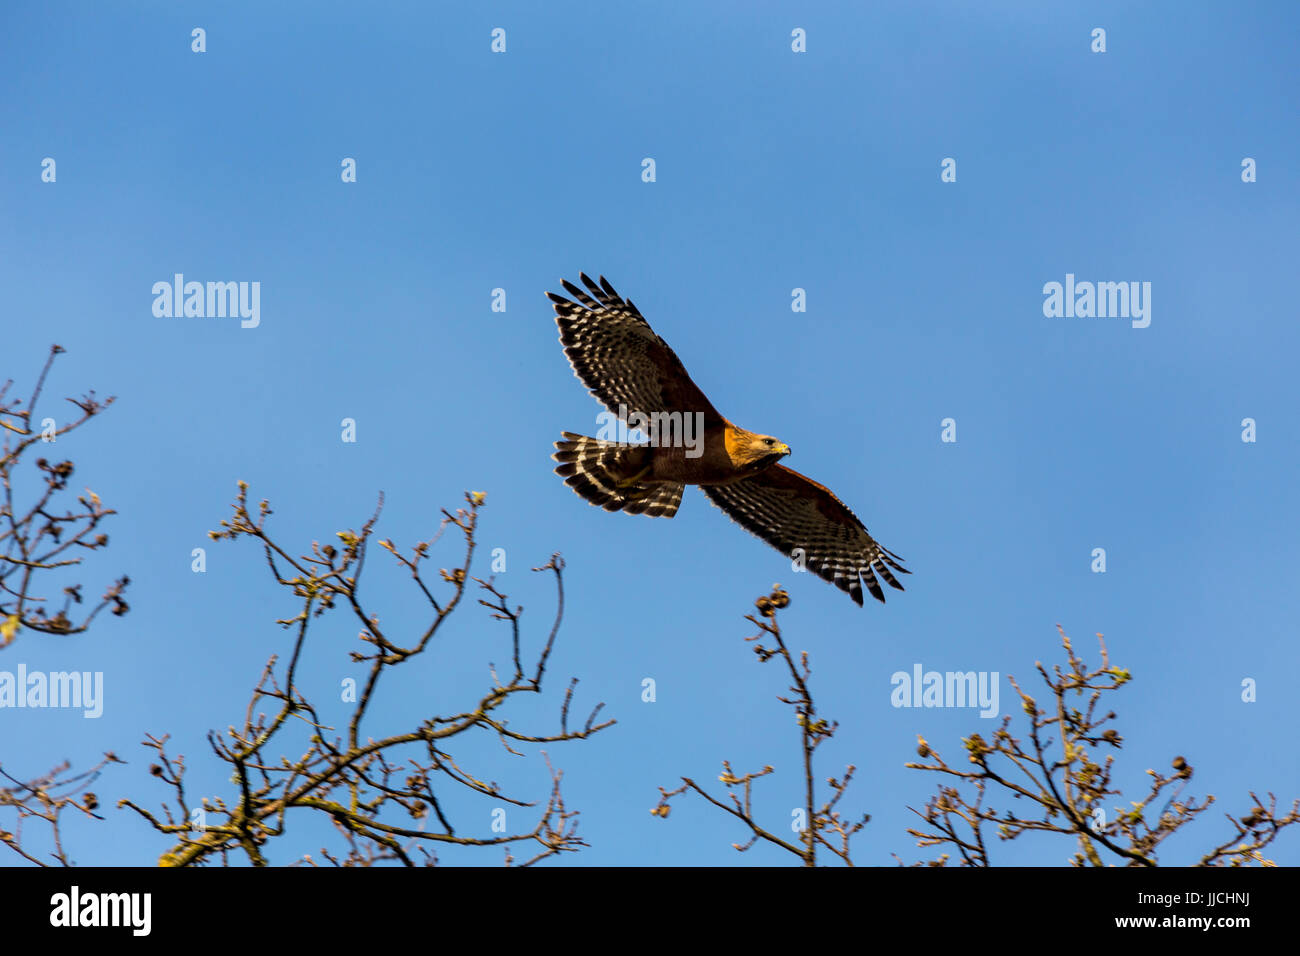 1, one, Red-shouldered hawk, Buteo lineatus, Red-shouldered hawk in flight, Novato, Marin County, California, United States, North America Stock Photo